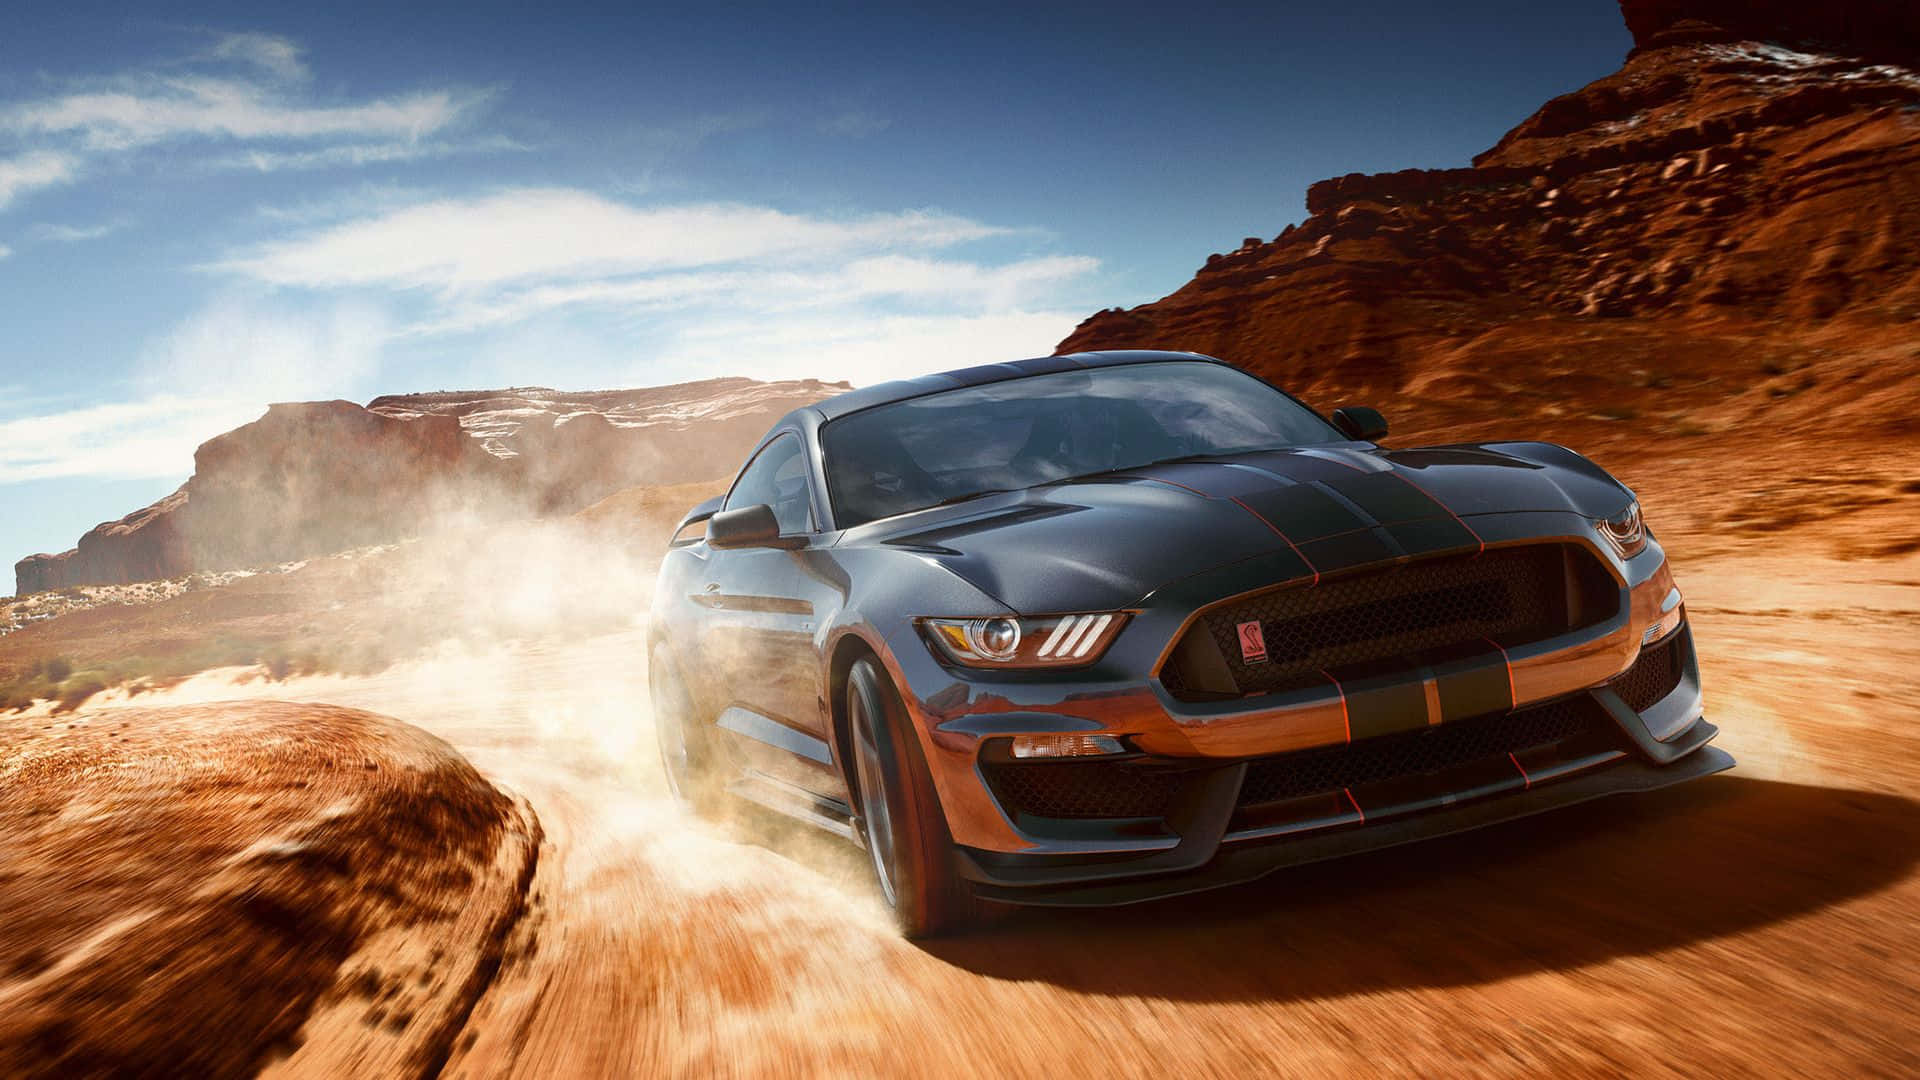 Powerful Ford Mustang Shelby GT350 in Action Wallpaper